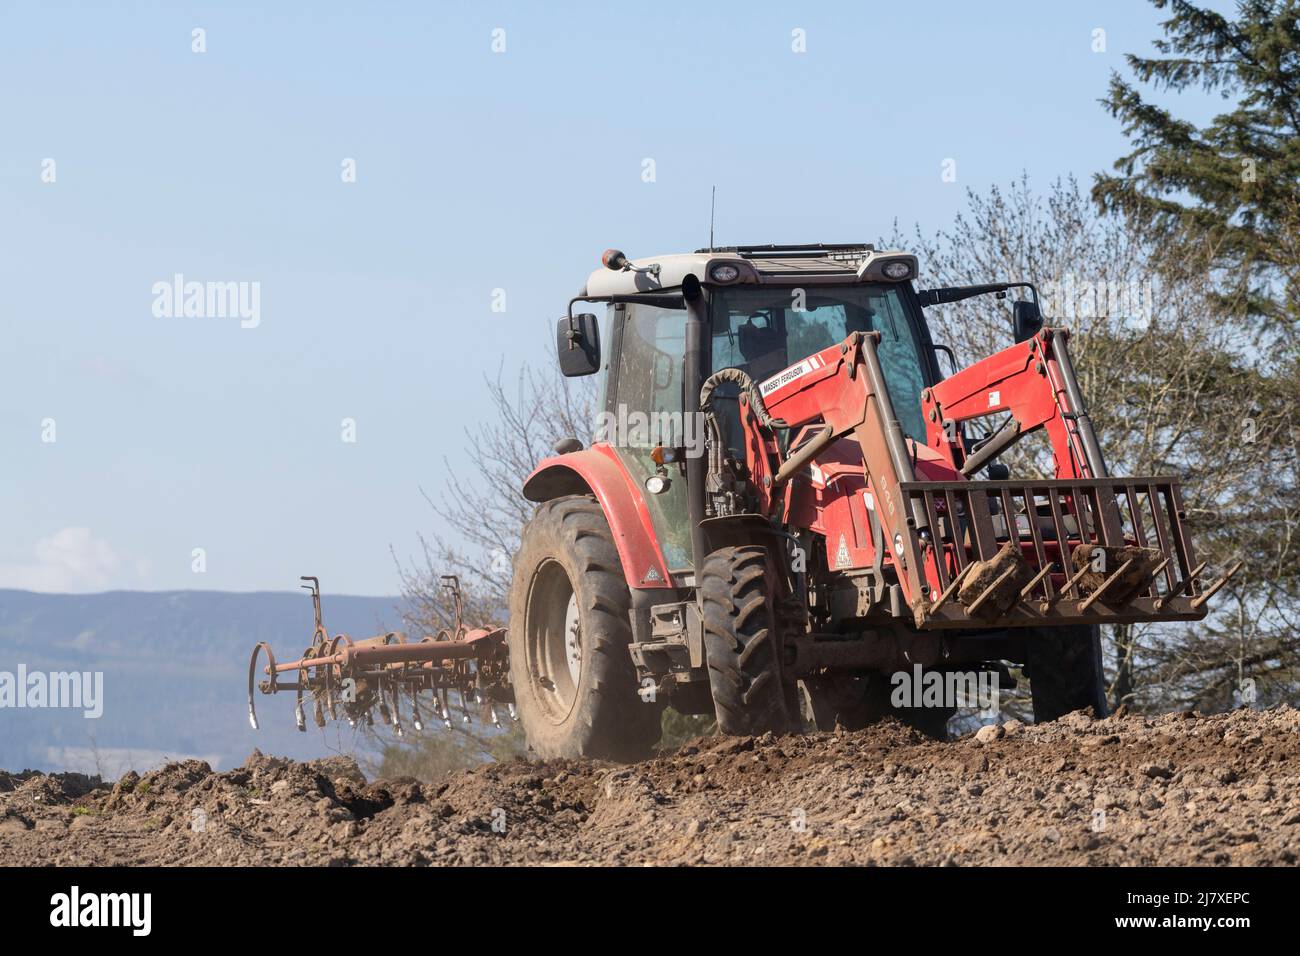 A Massey Ferguson Tractor with a Front Loader and a Suspended Cultivator Turning in a Ploughed Field in Sunshine Stock Photo